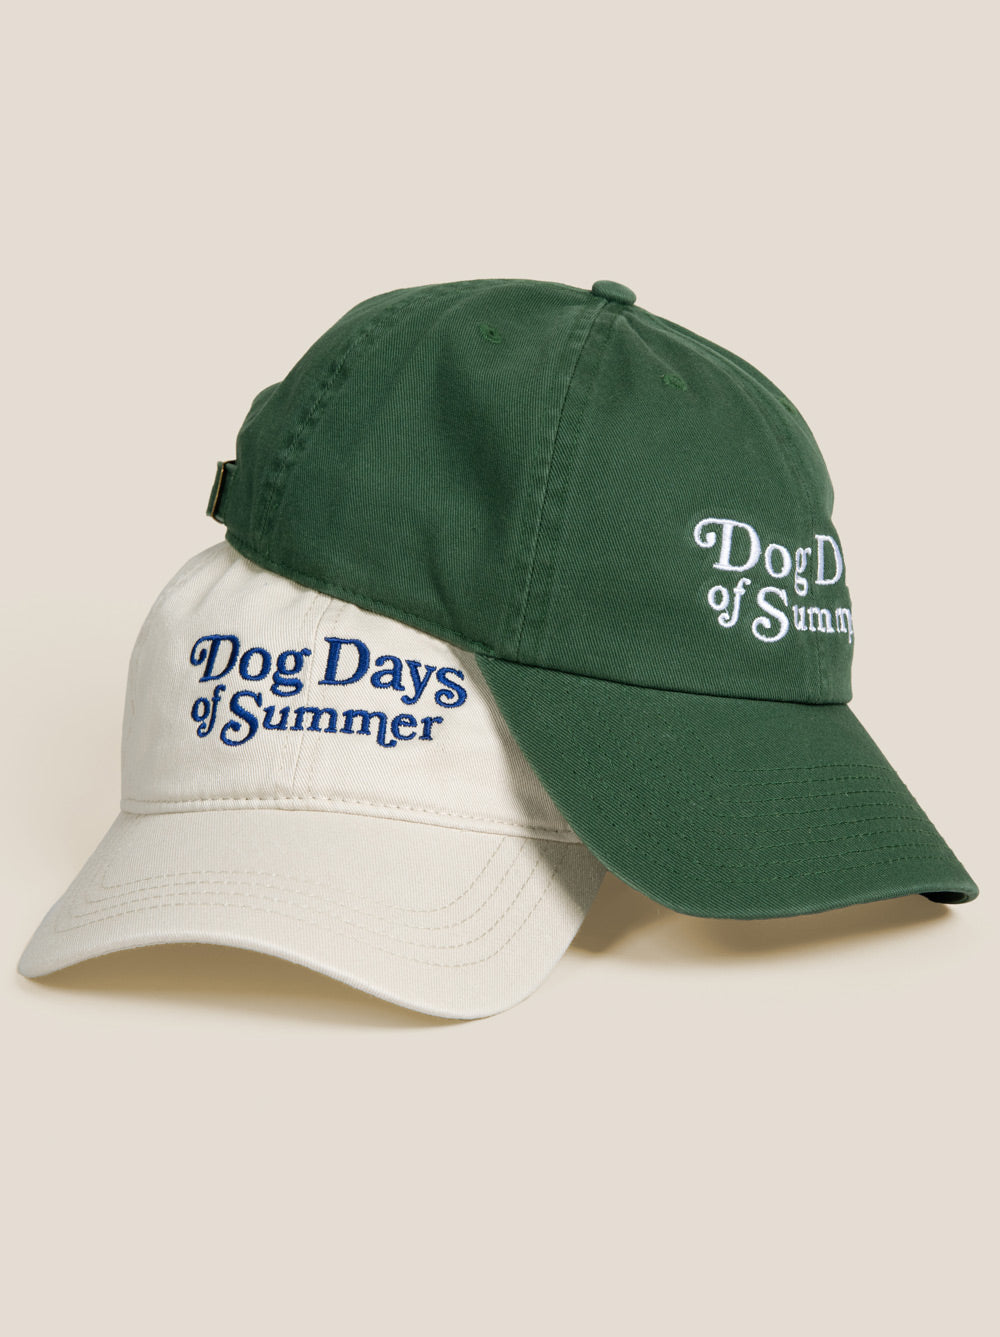 Dog Days of Summer Hat by Good Thomas, Dog Lover Gift